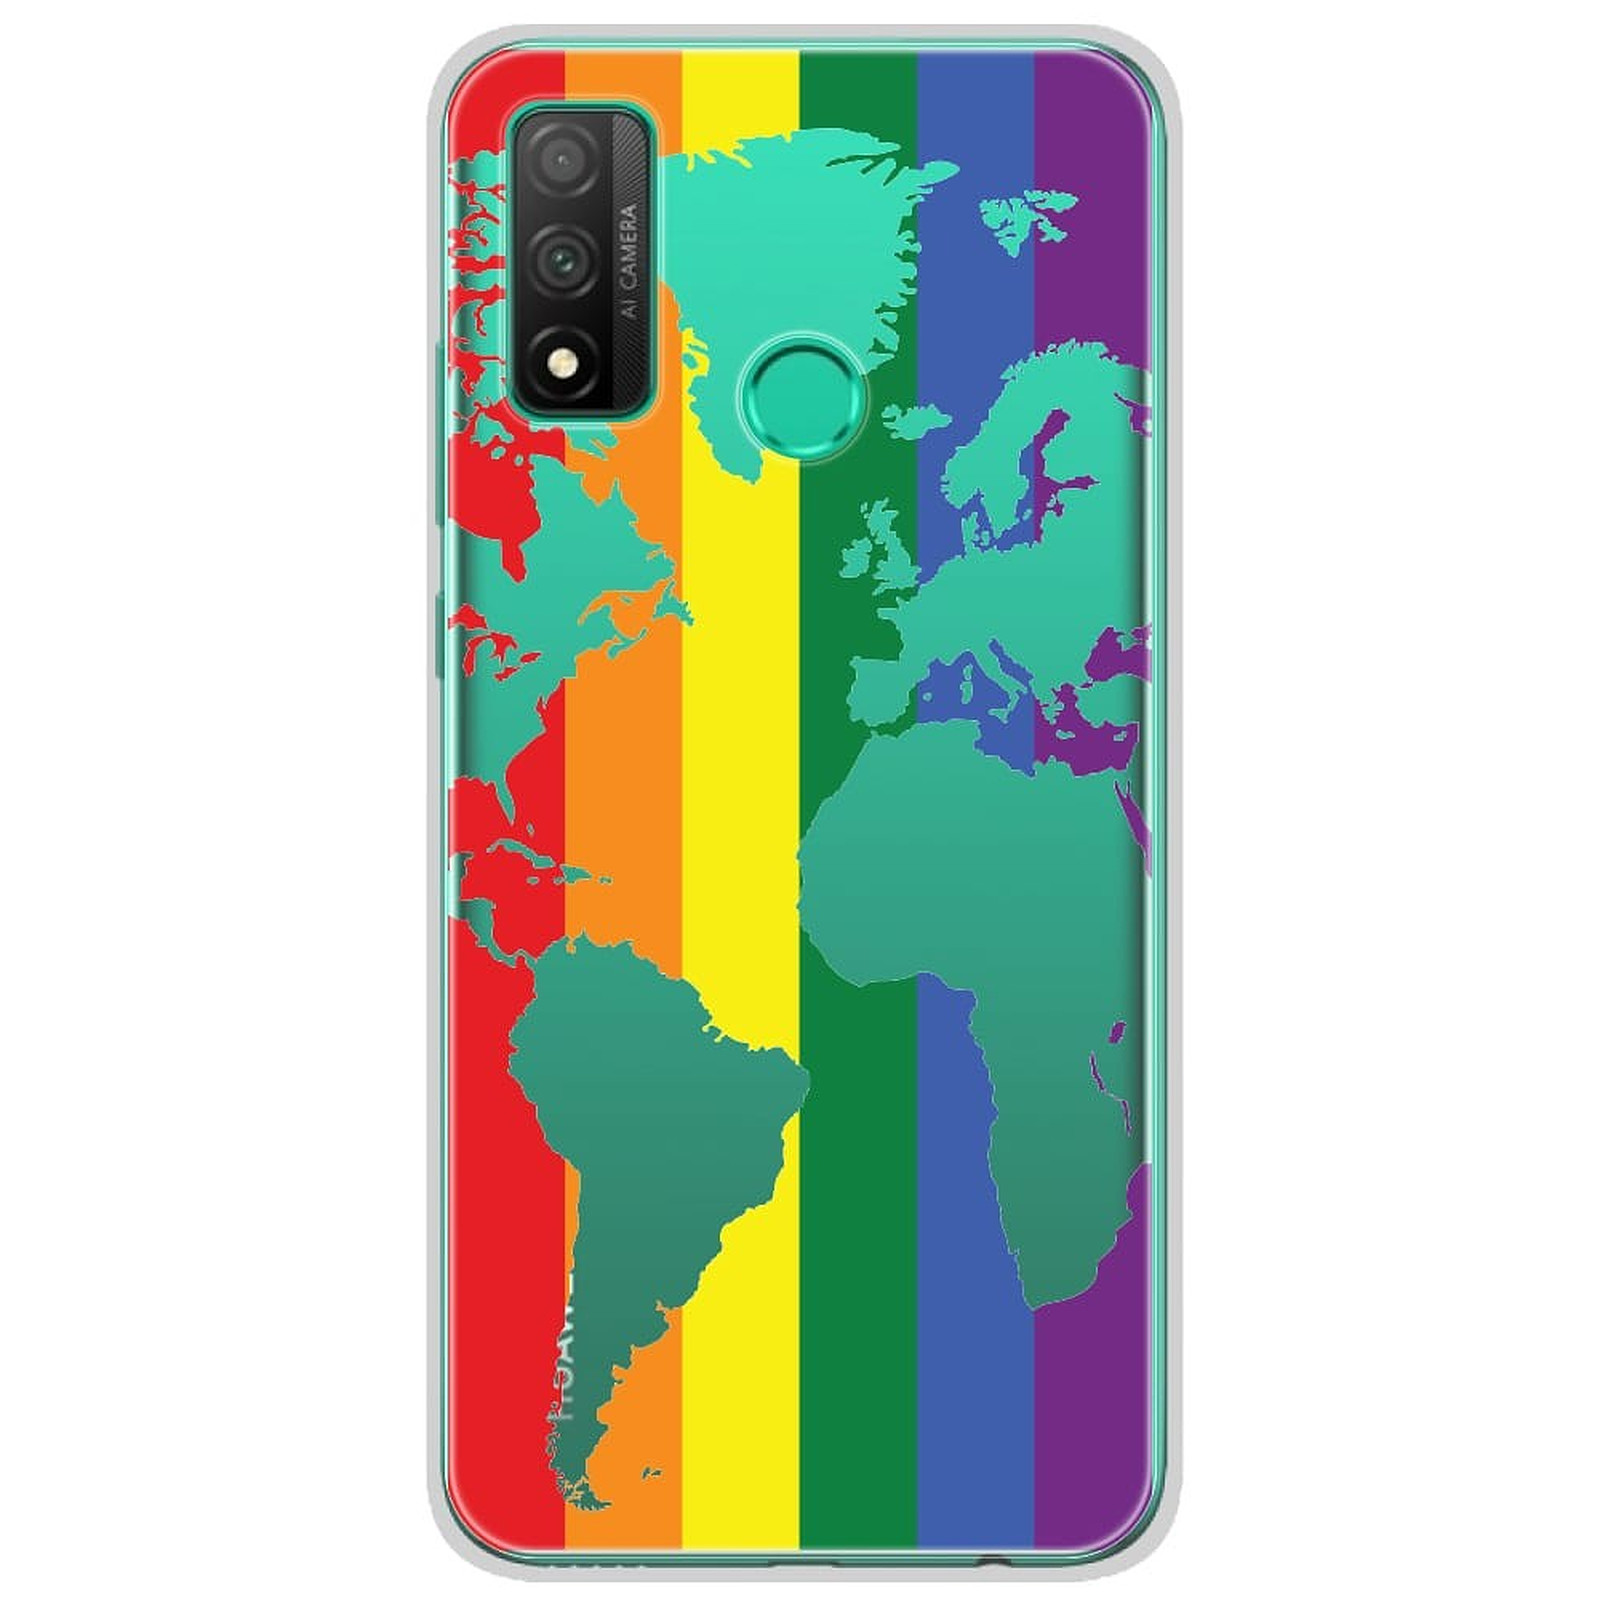 1001 Coques Coque silicone gel Huawei P Smart 2020 motif Map LGBT - Coque telephone 1001Coques